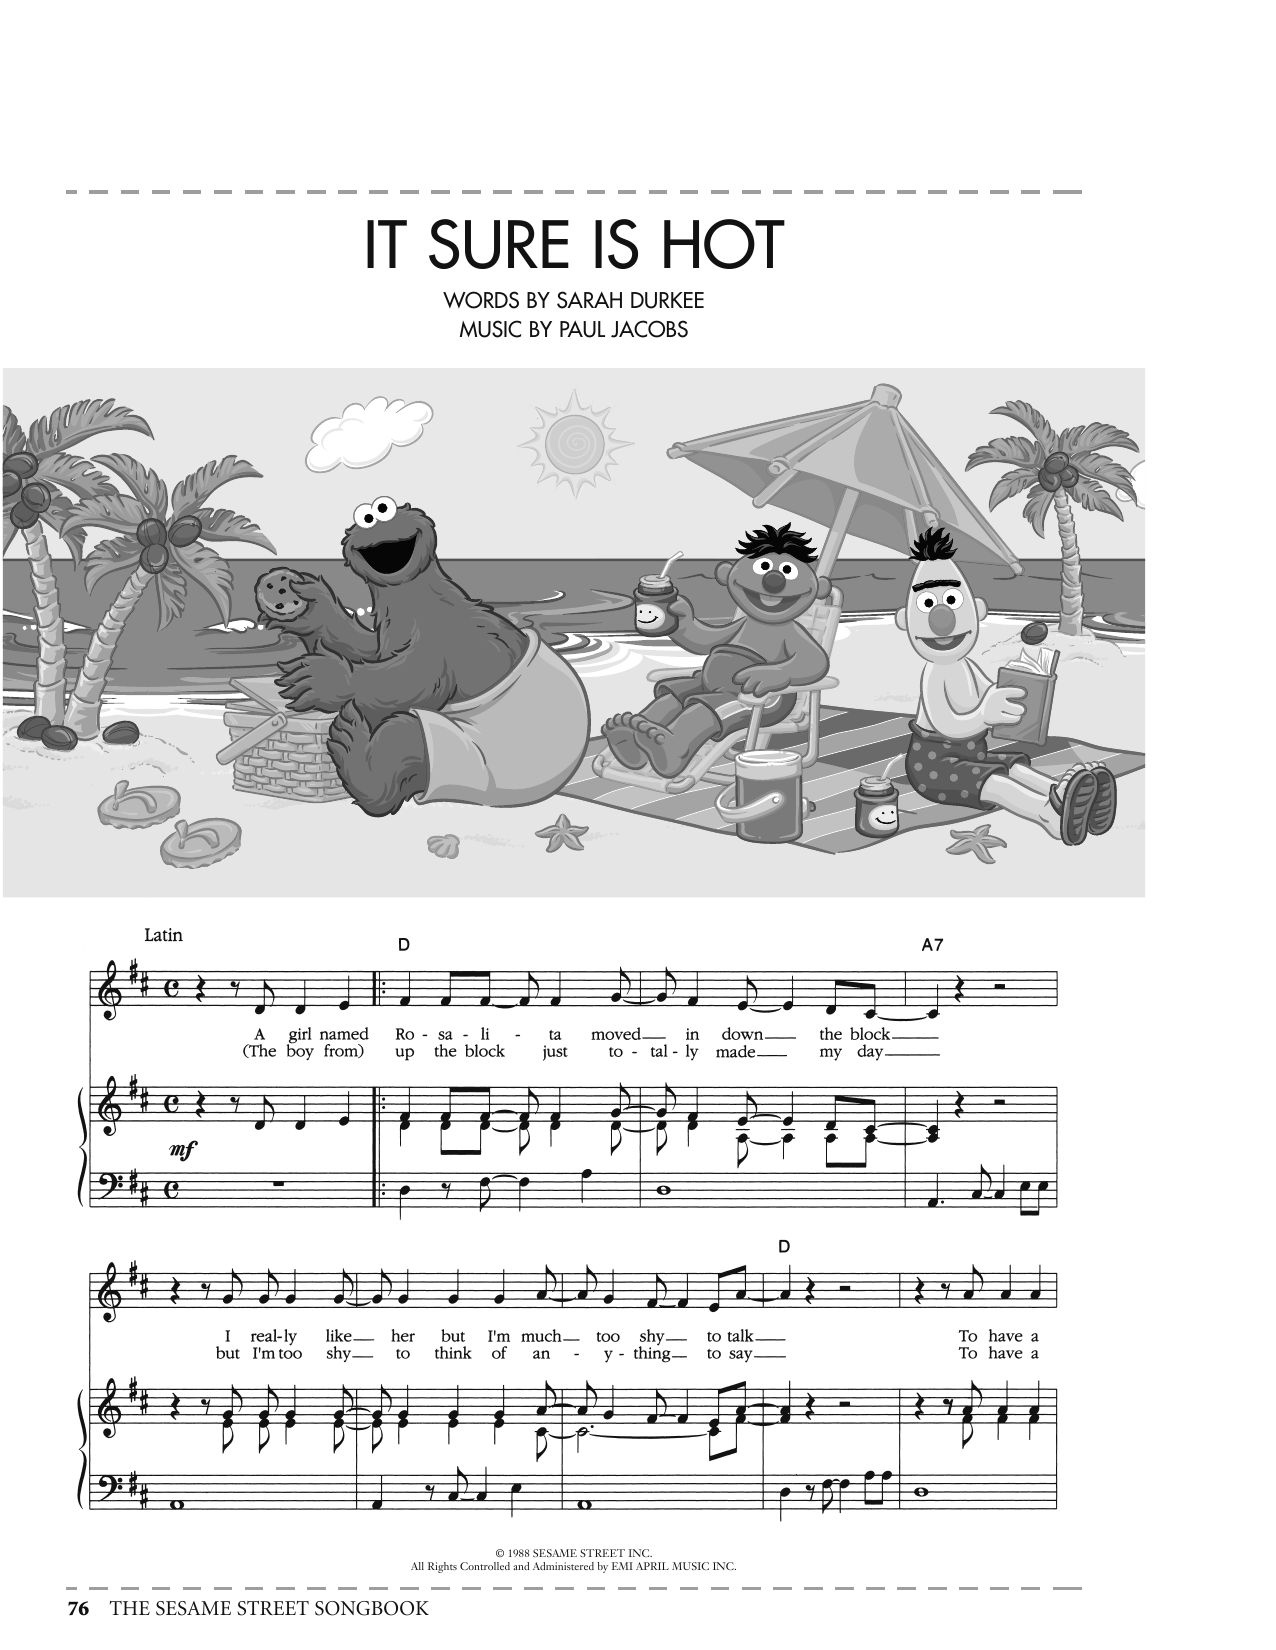 Paul Jacobs It Sure Is Hot (from Sesame Street) sheet music notes printable PDF score